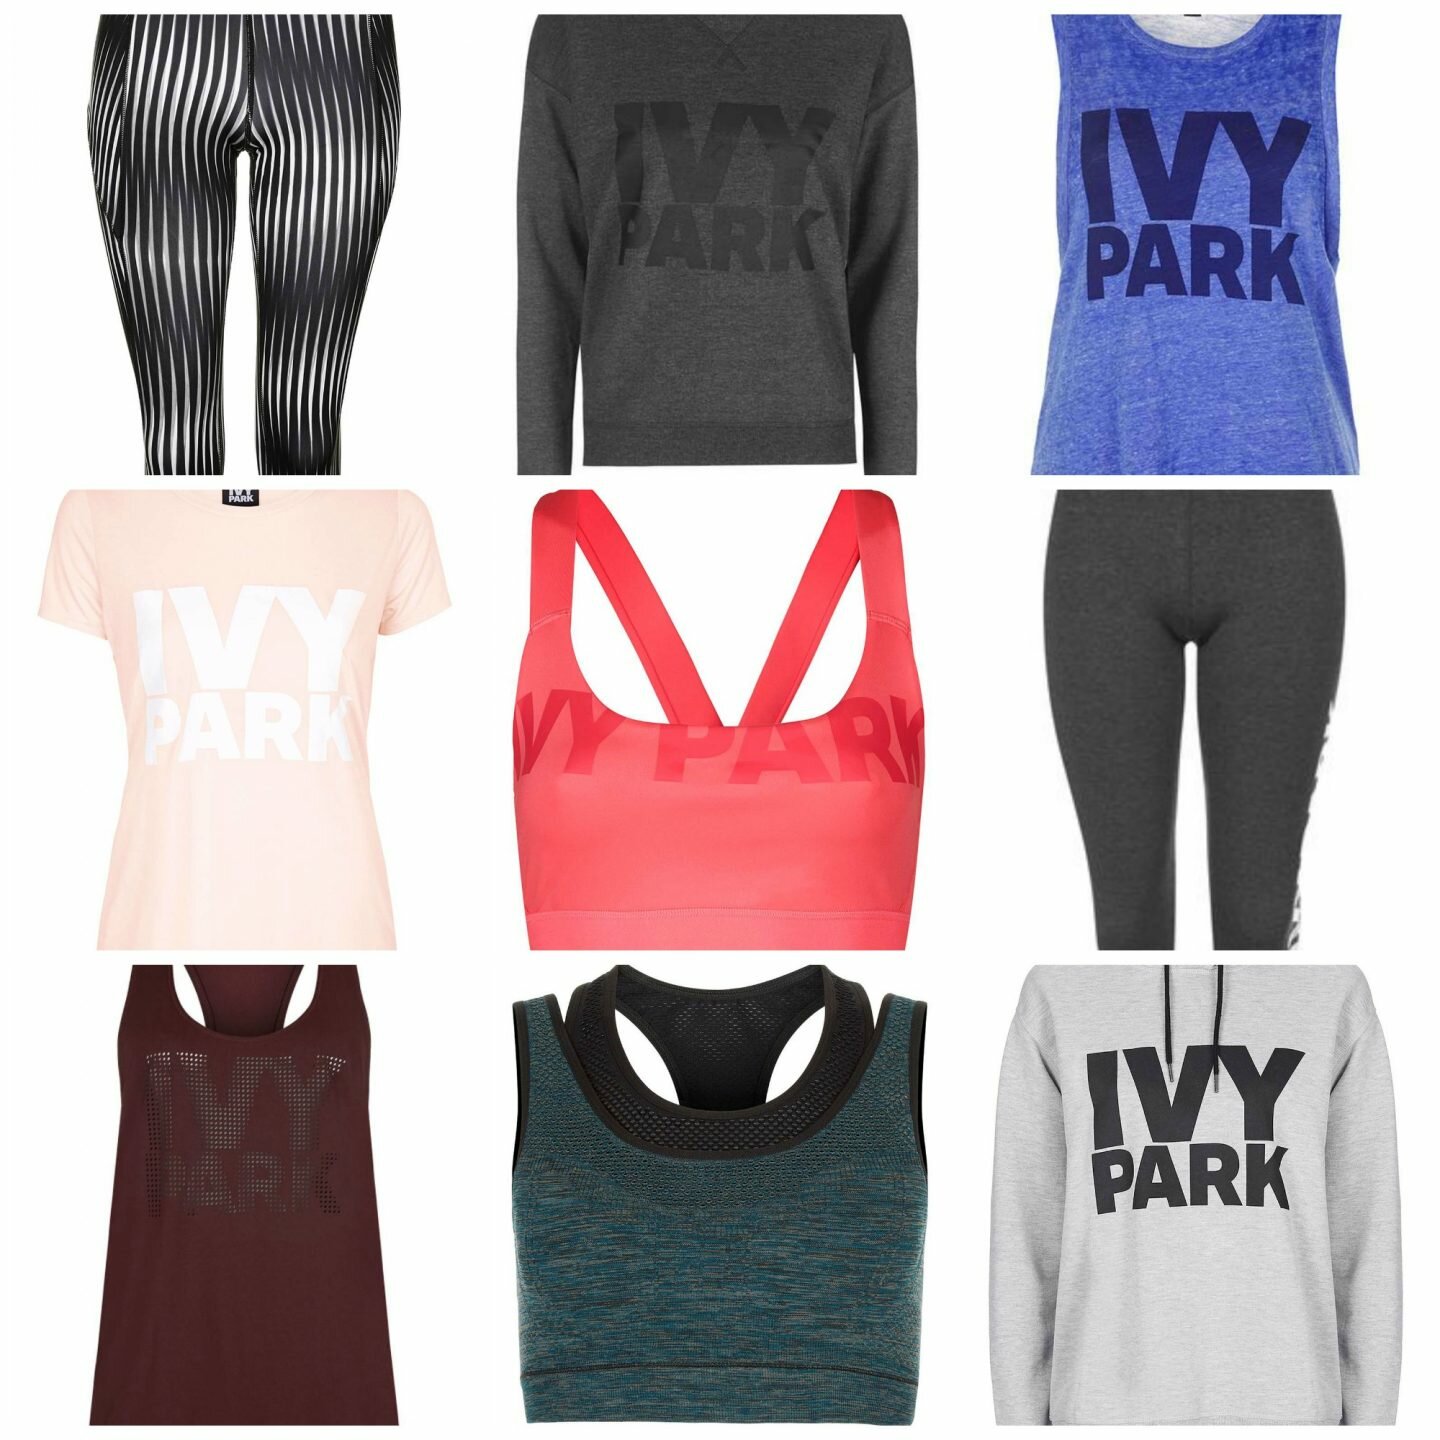 A Look at Ivy Park A/W 2016